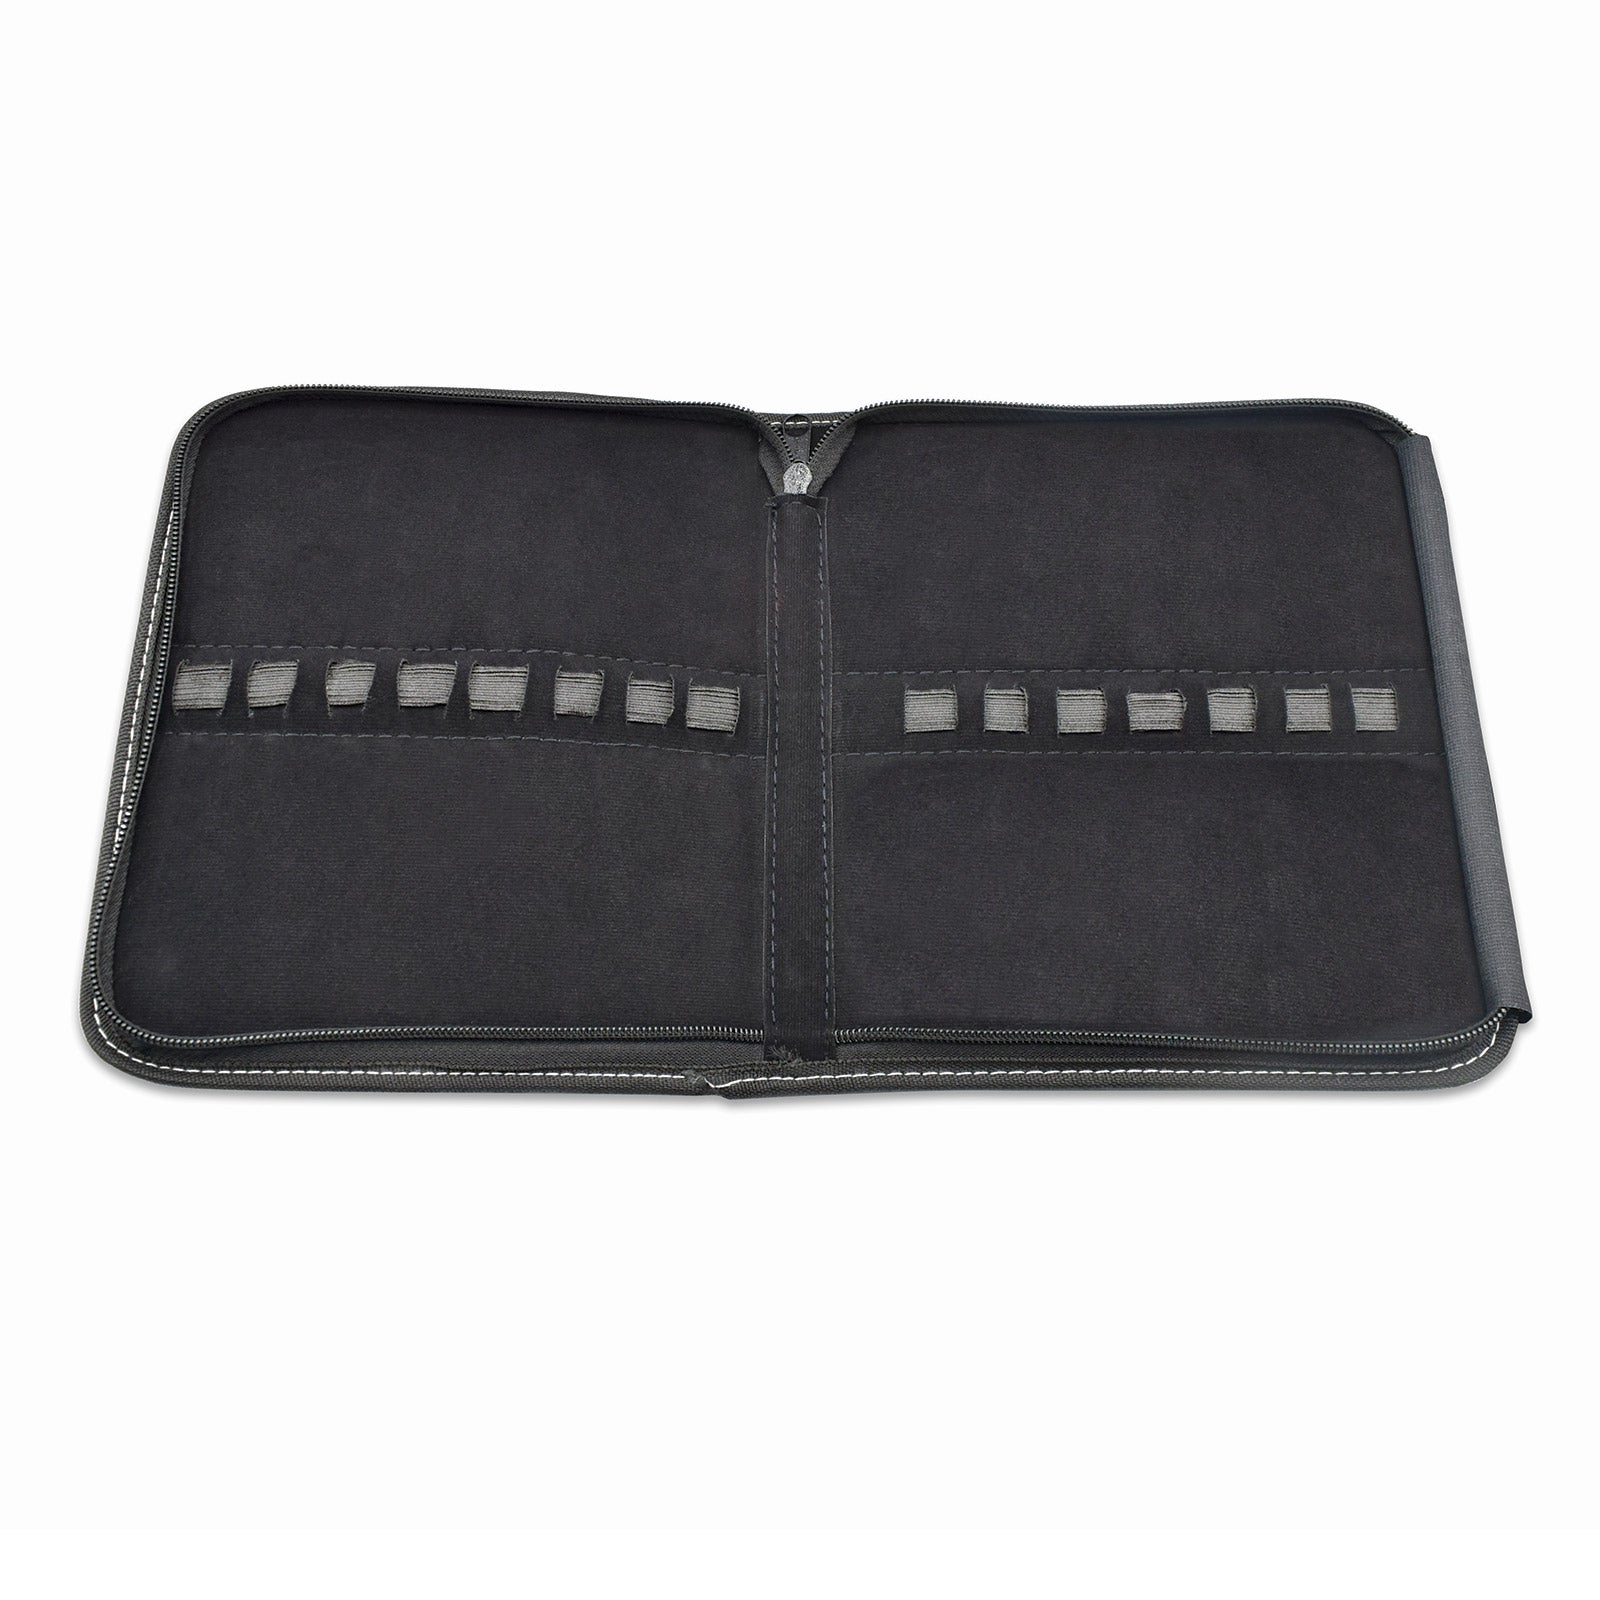 Micro-Mark Specialty Tool Protective Case